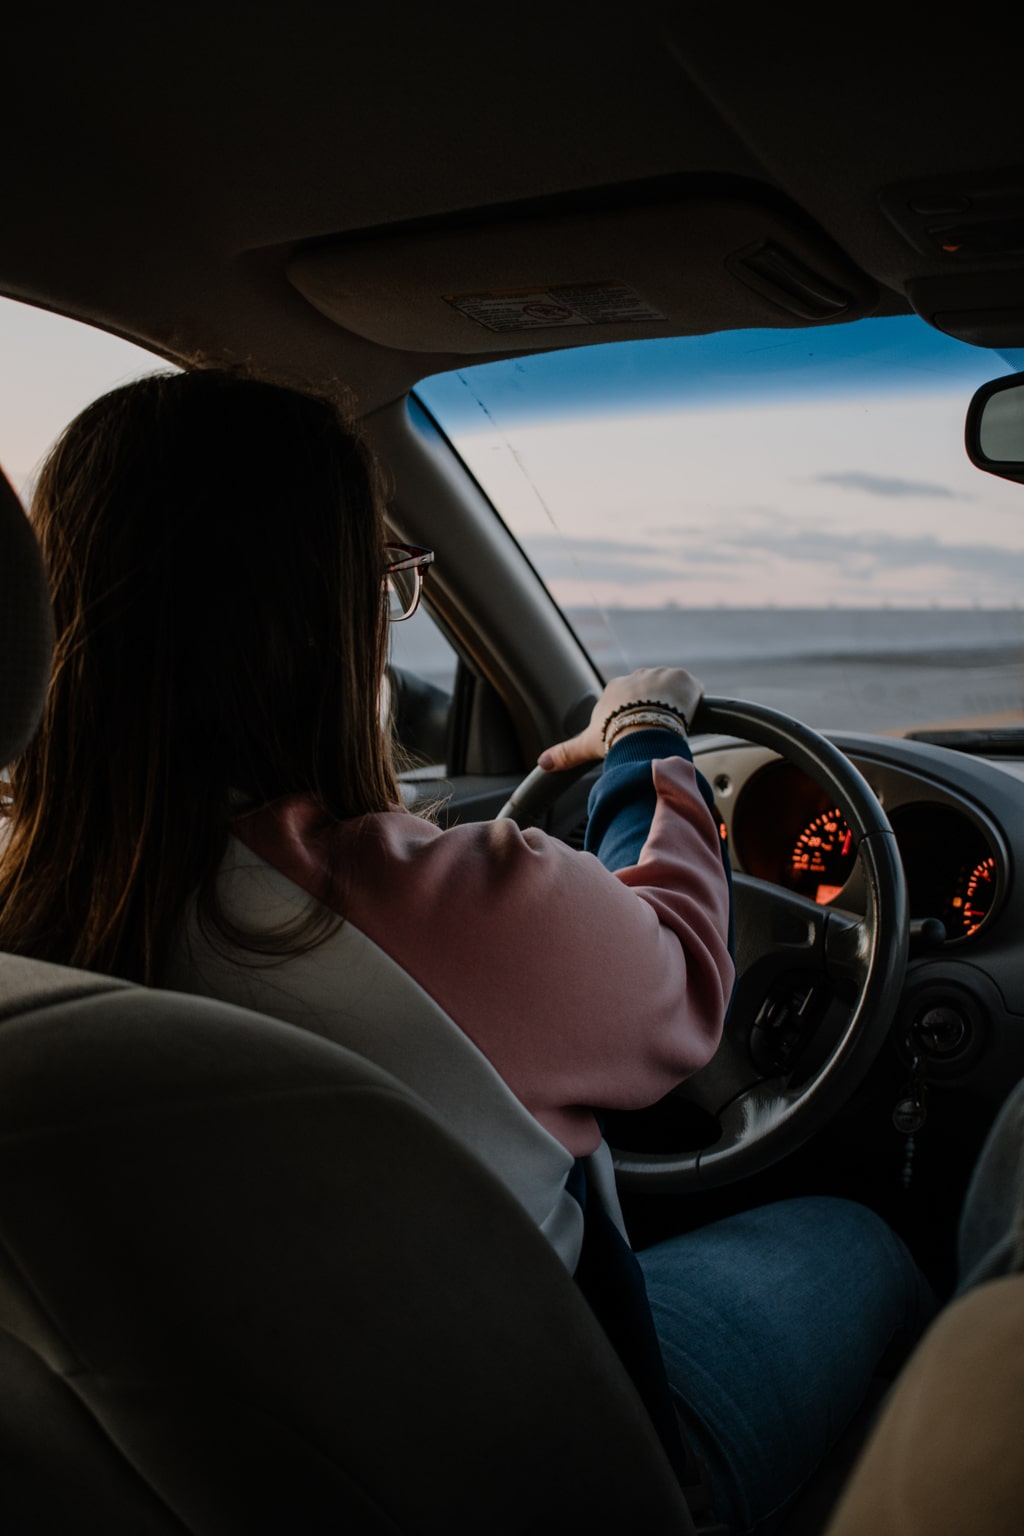 Whether an au pair can drive in their host country or not depends on the country they are au pairing in and their nationality.